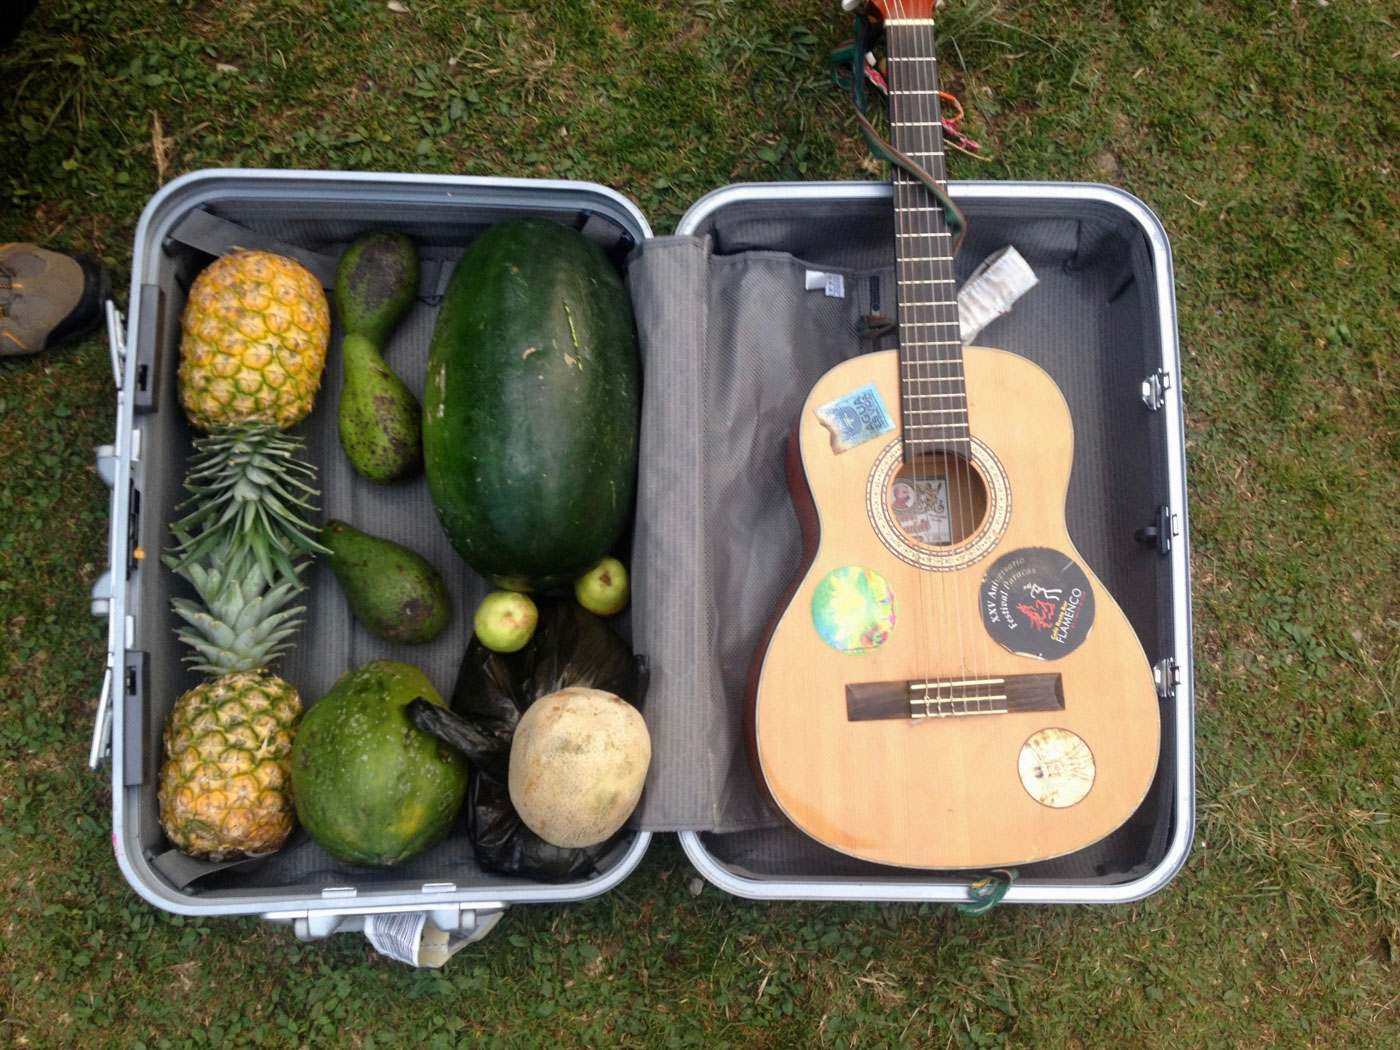 open suitcase with a guitar and couple of fruits  within it